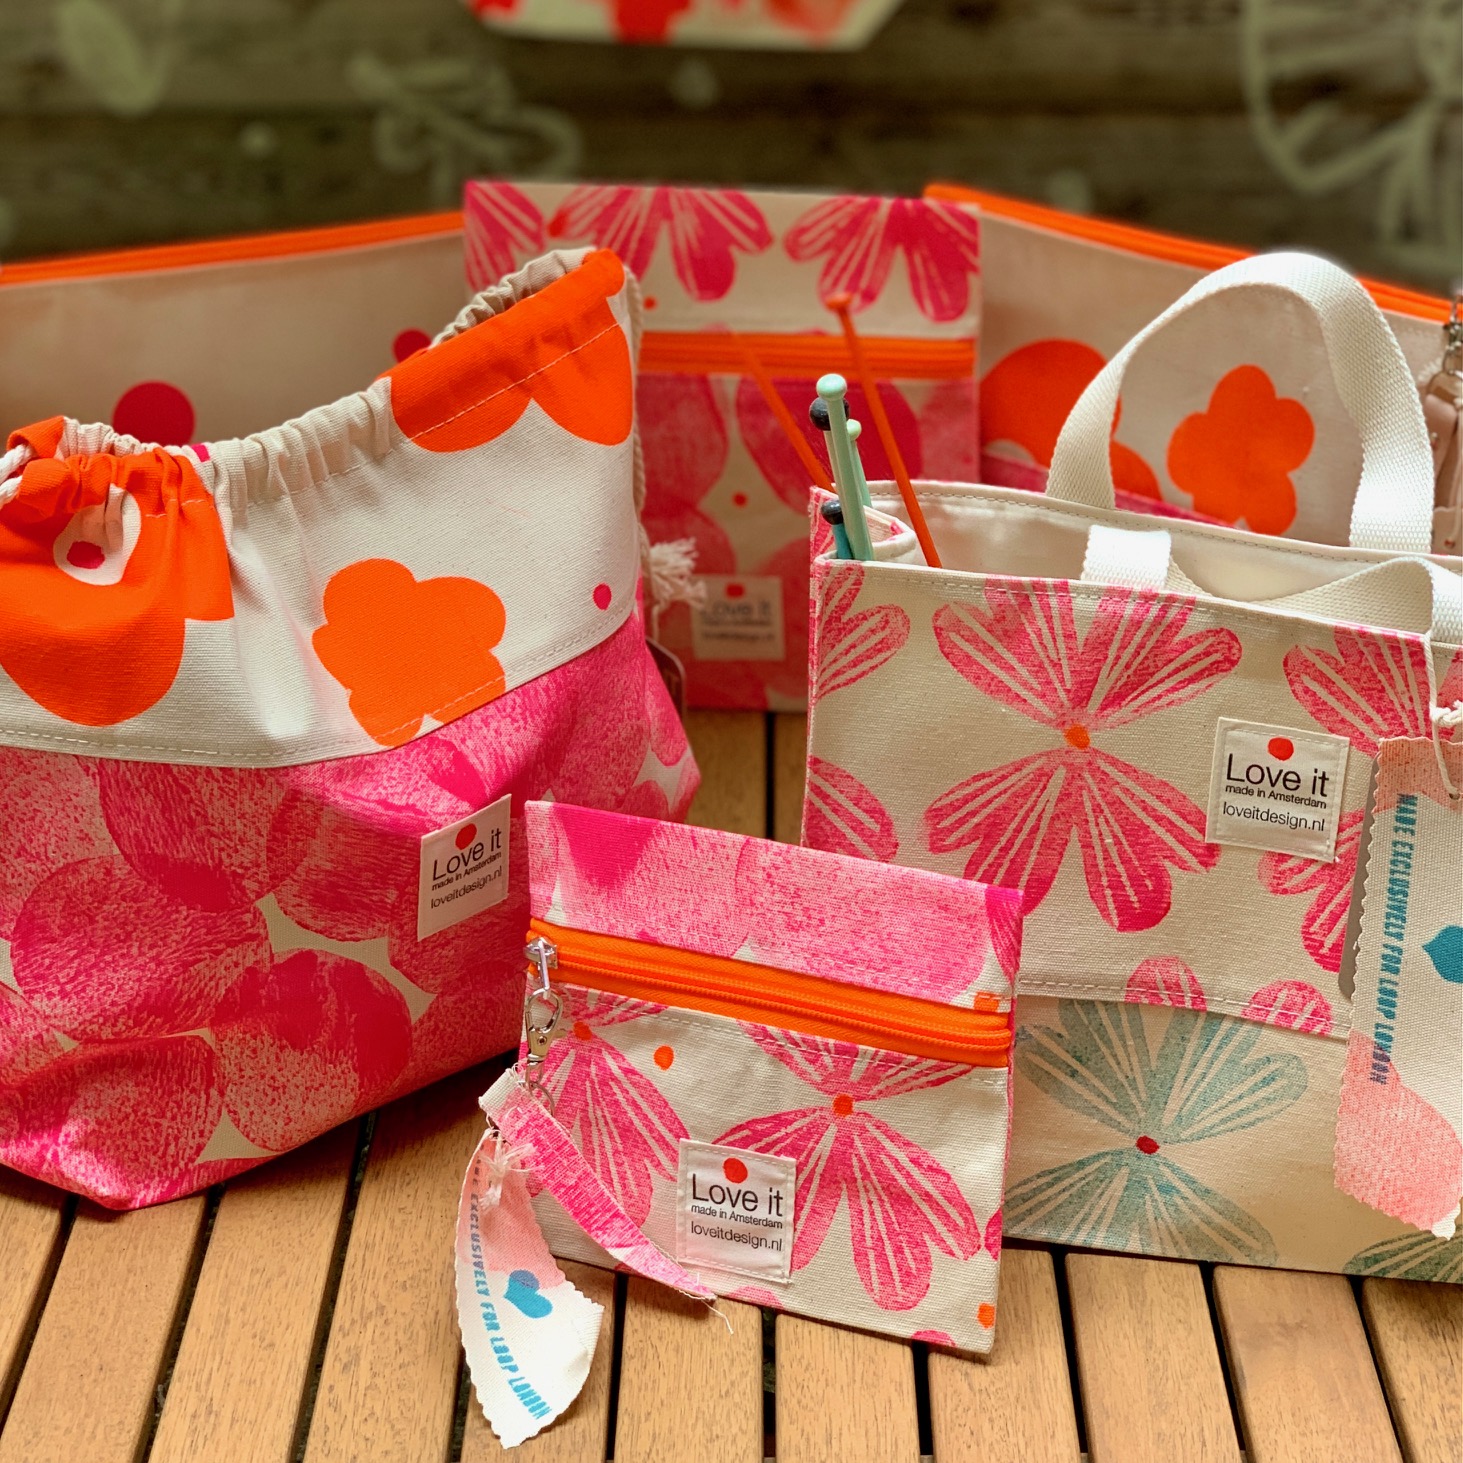 Falling in Love with Love It Project Bags